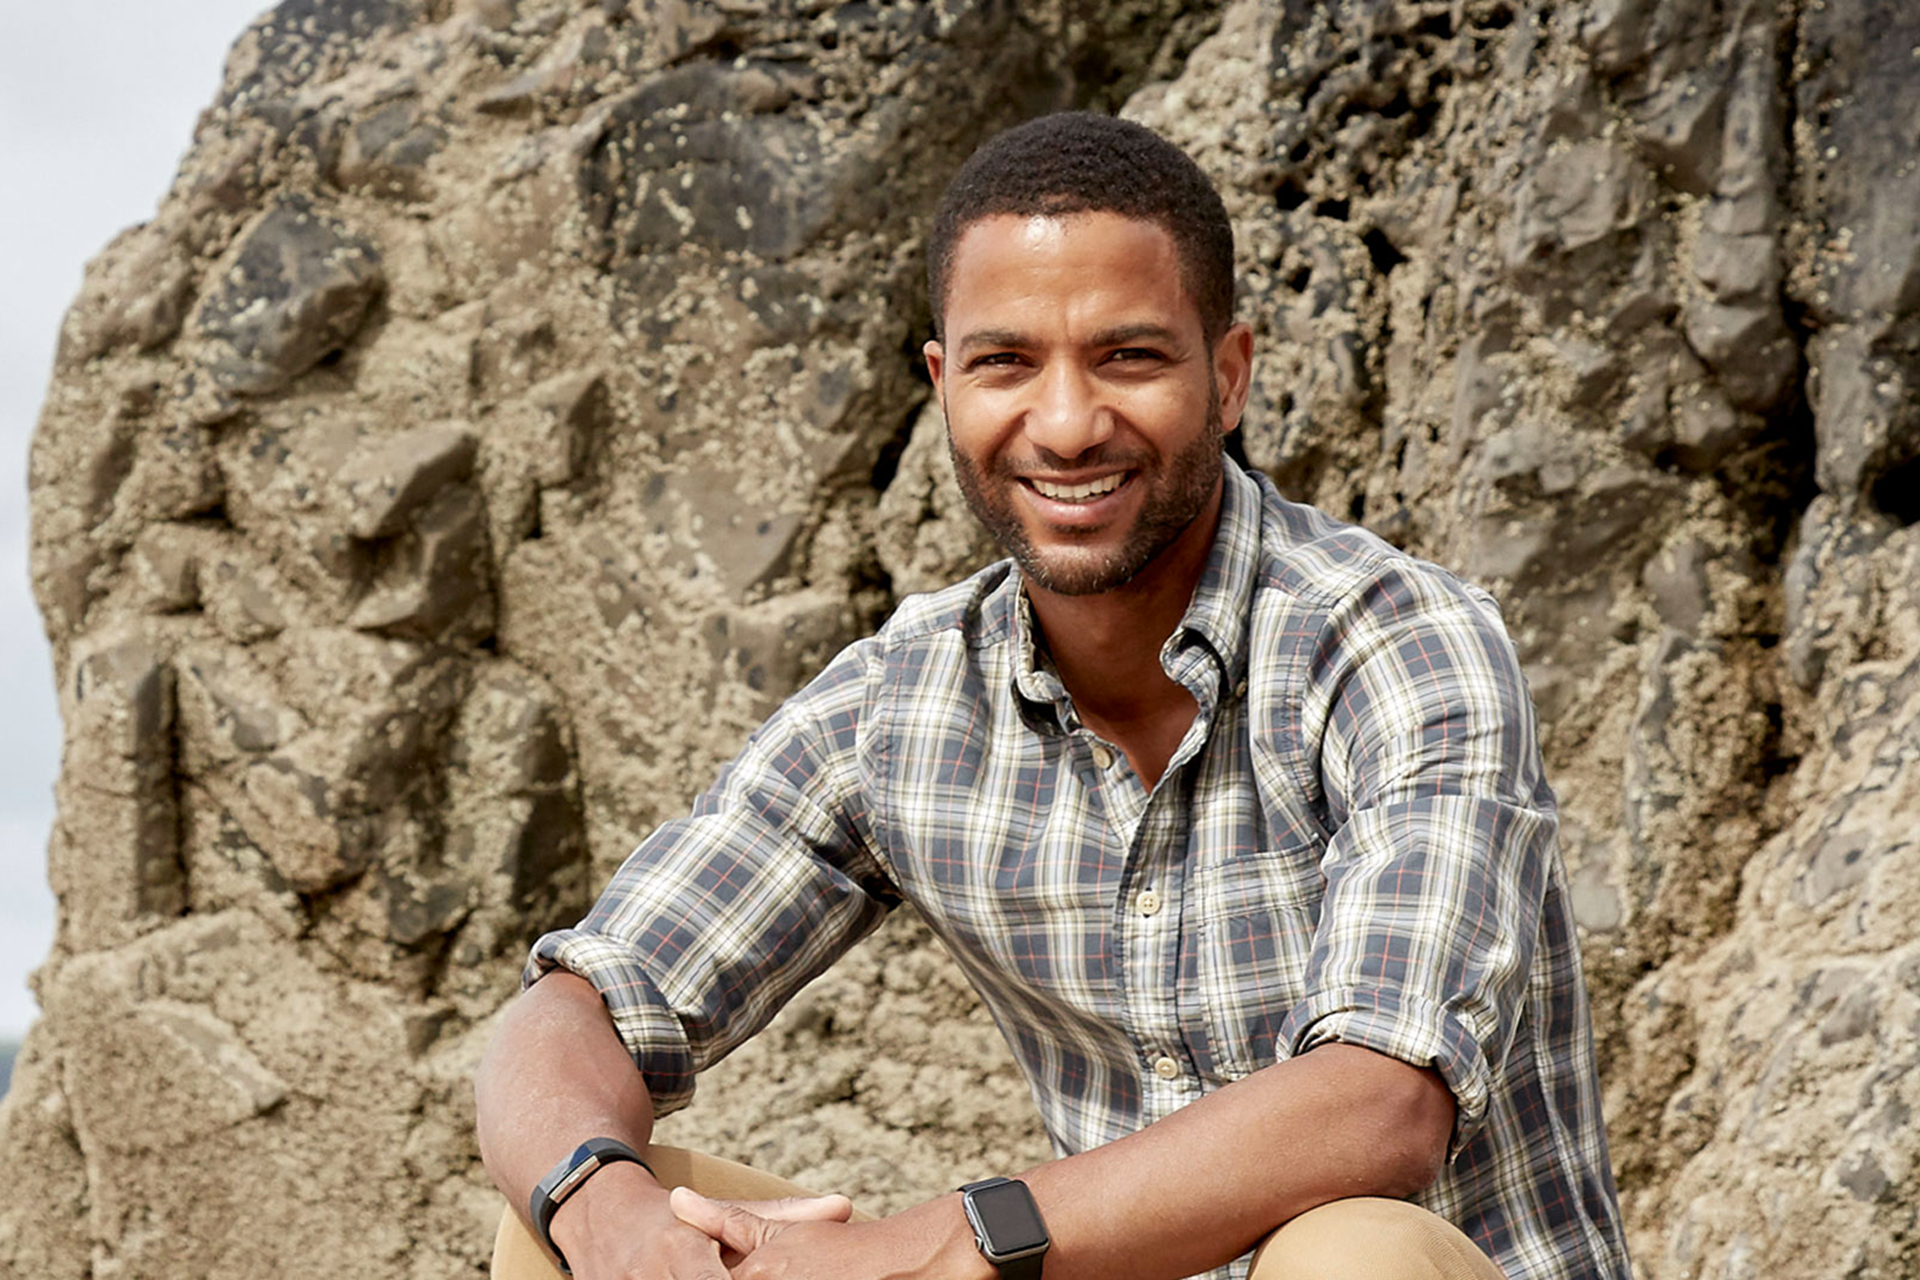 Sean Fletcher smiling and sitting on a rock by the coast